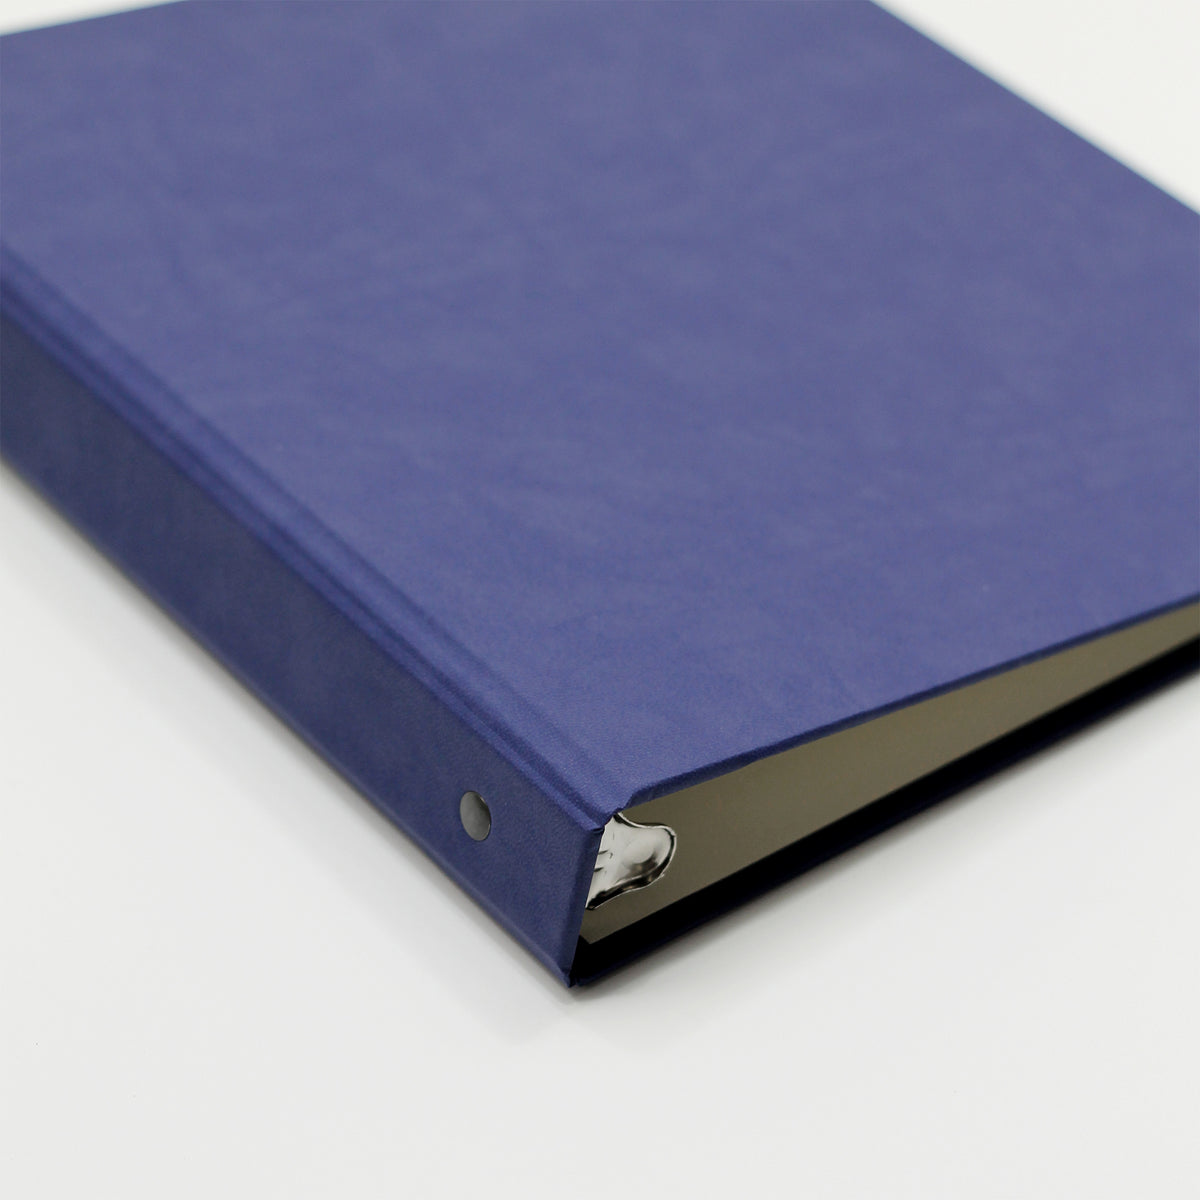 Holiday Card Album | Cover: Indigo Vegan Leather | Embossed with “Holiday Cards” | Available Personalized